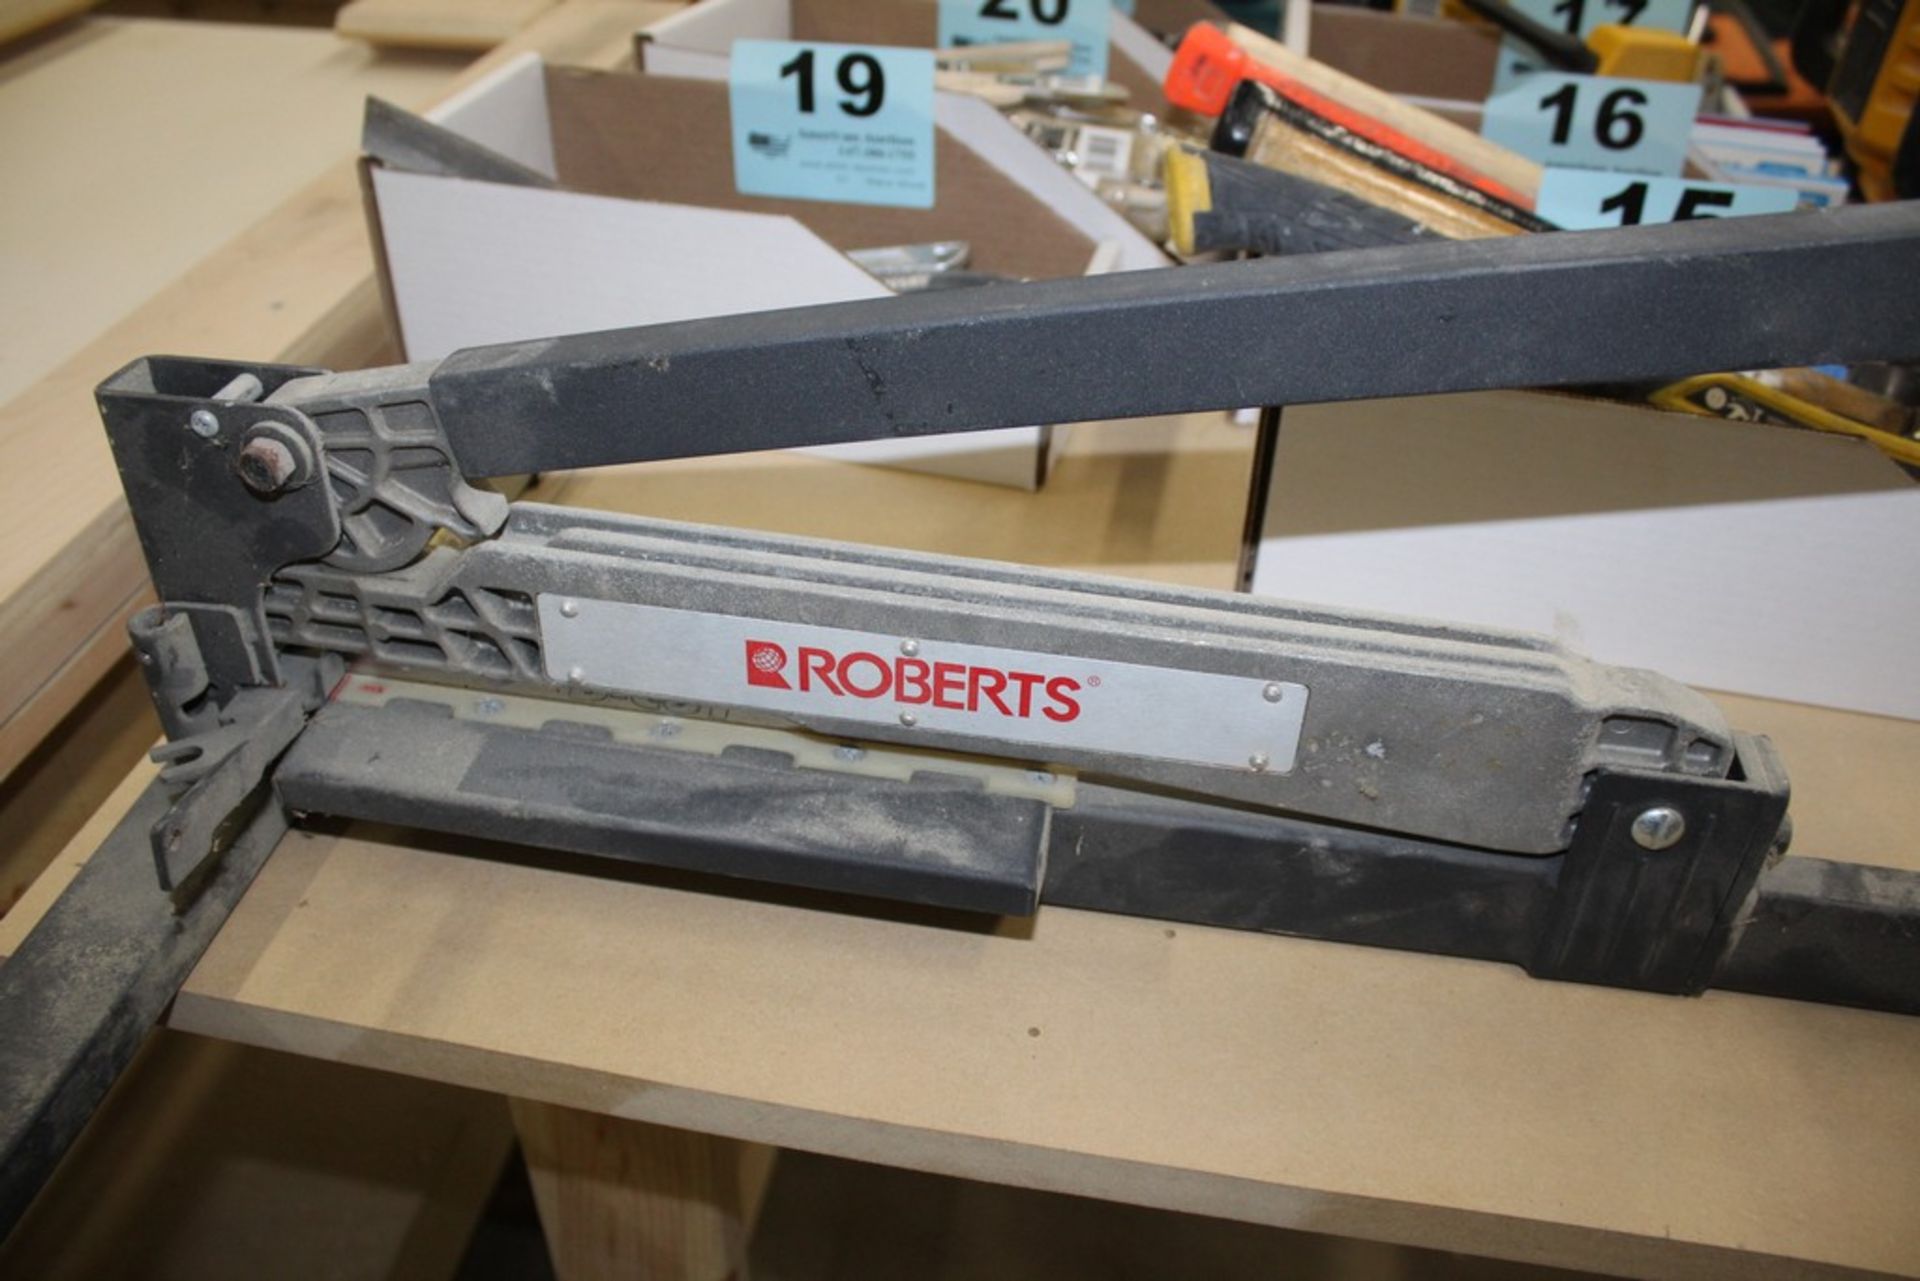 ROBERTS 8" HAND OPERATED SHEAR - Image 2 of 2